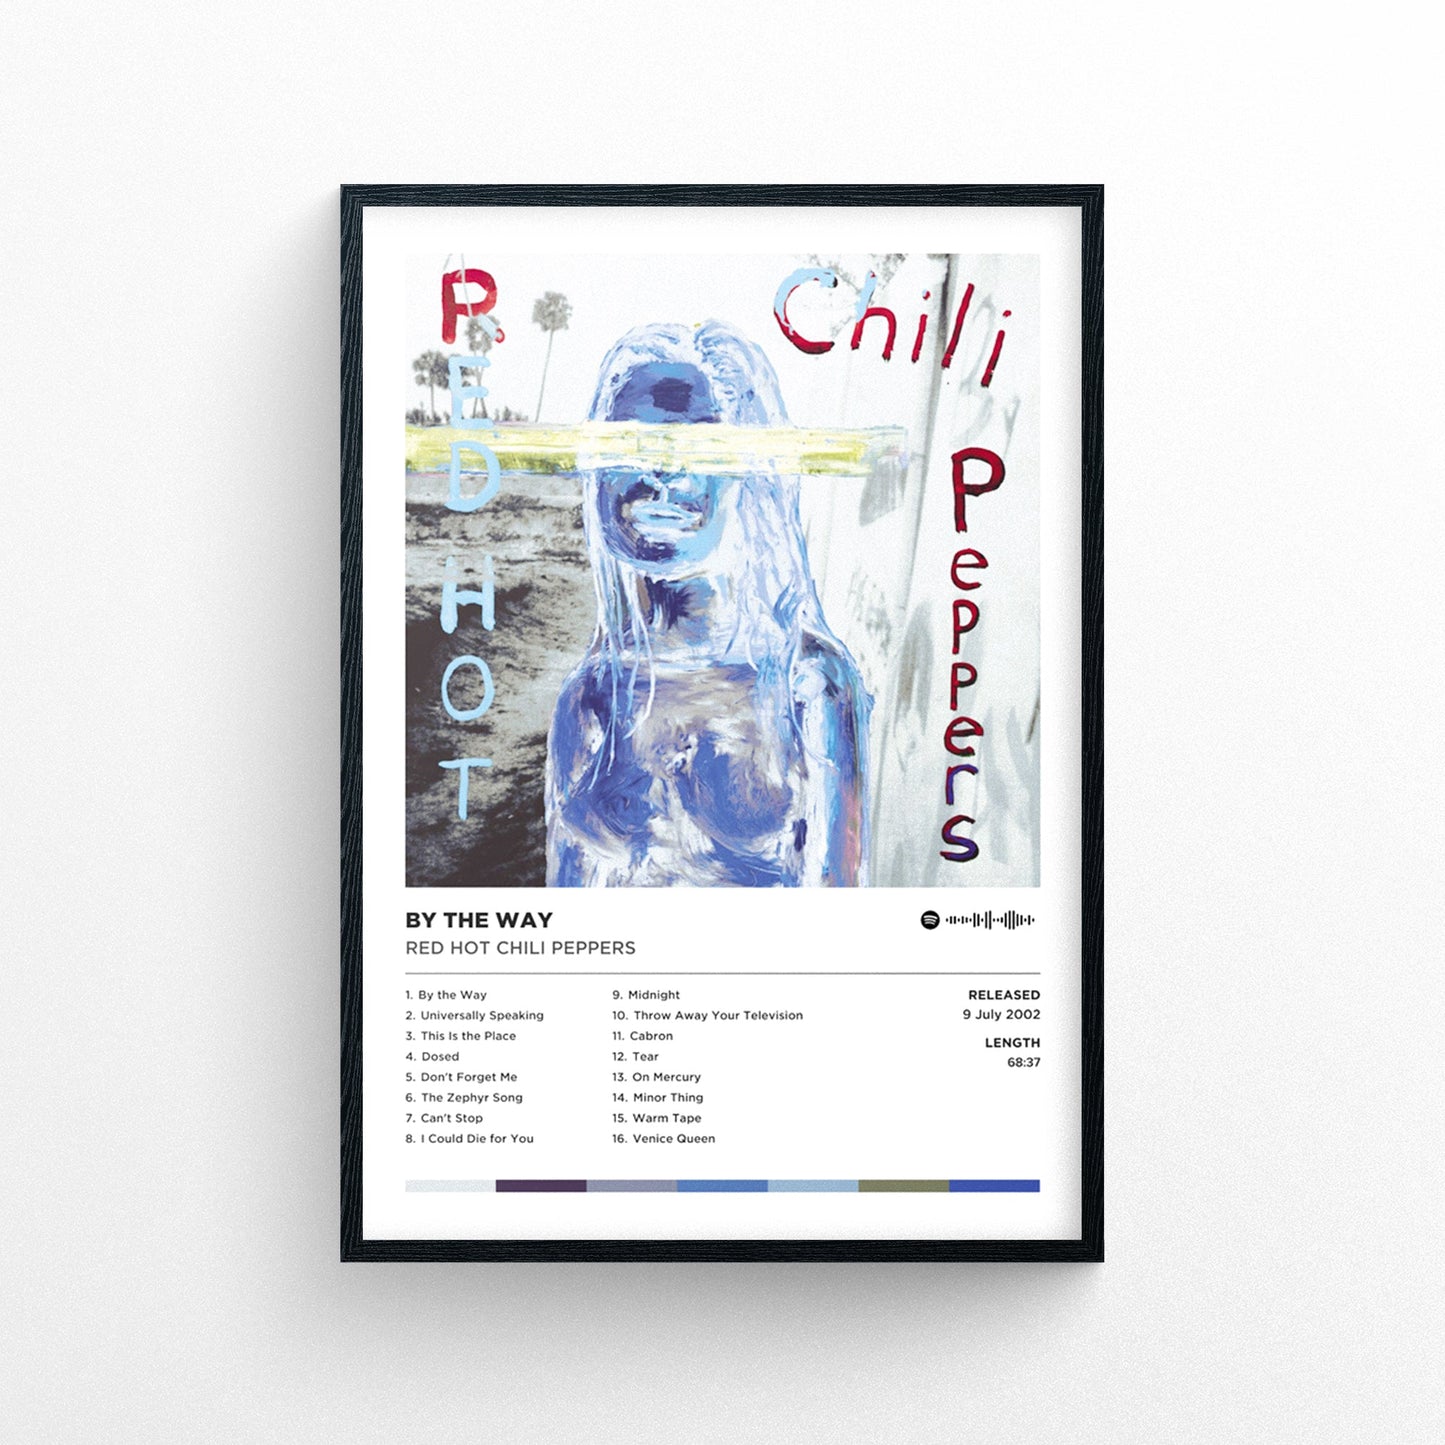 Red Hot Chili Peppers - by the Way Poster Print | Framed Options | Album Cover Artwork